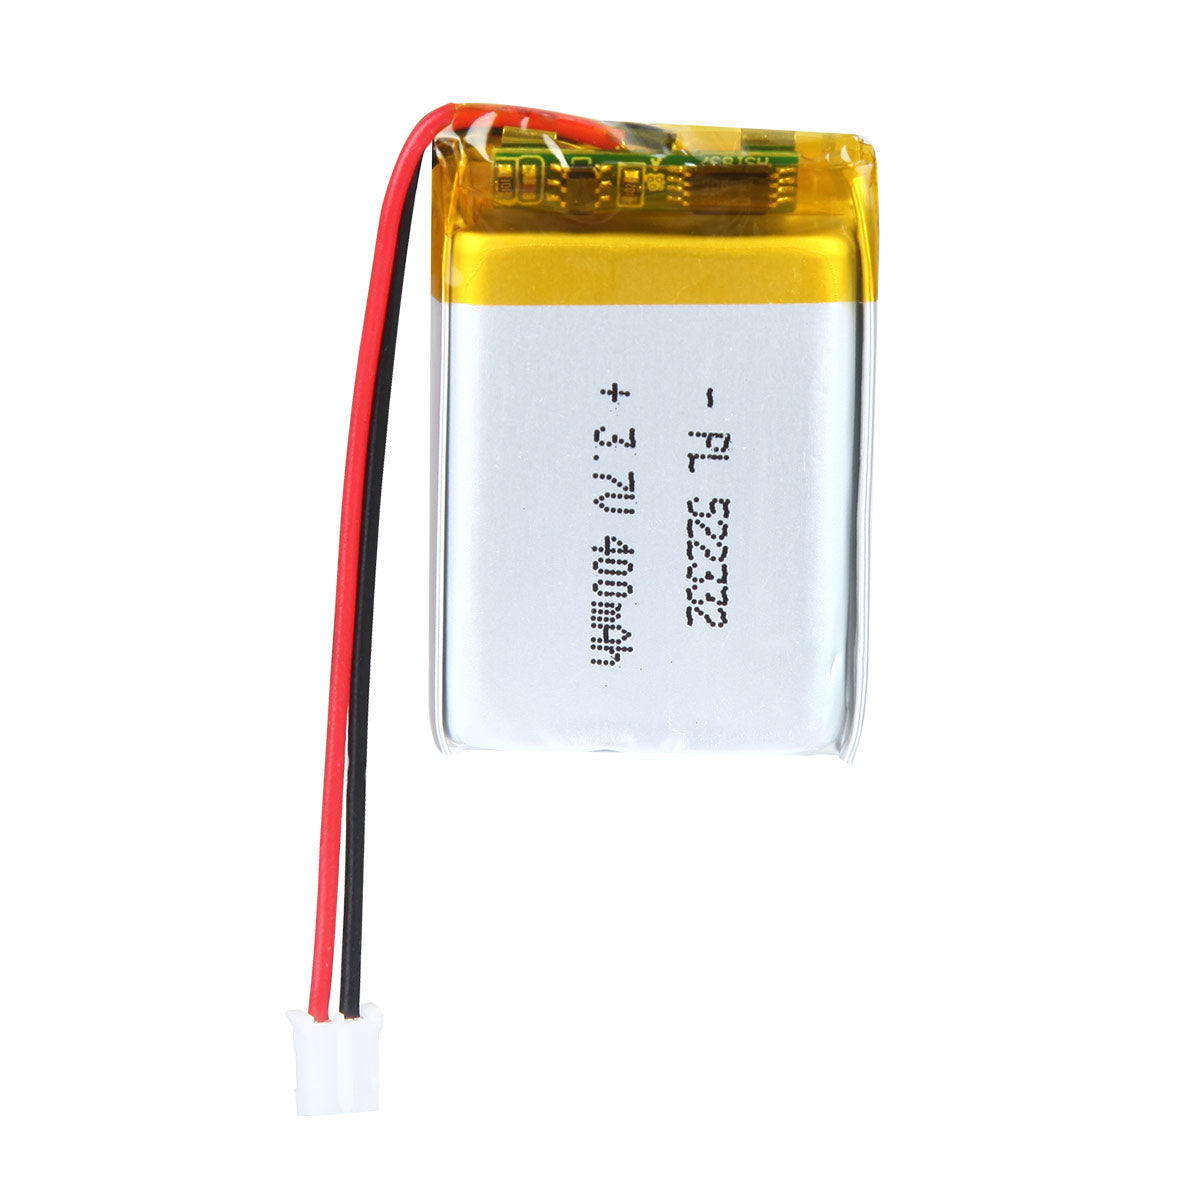 YDL 3.7V 400mAh 522332 Rechargeable Lithium Polymer Battery Length 34mm